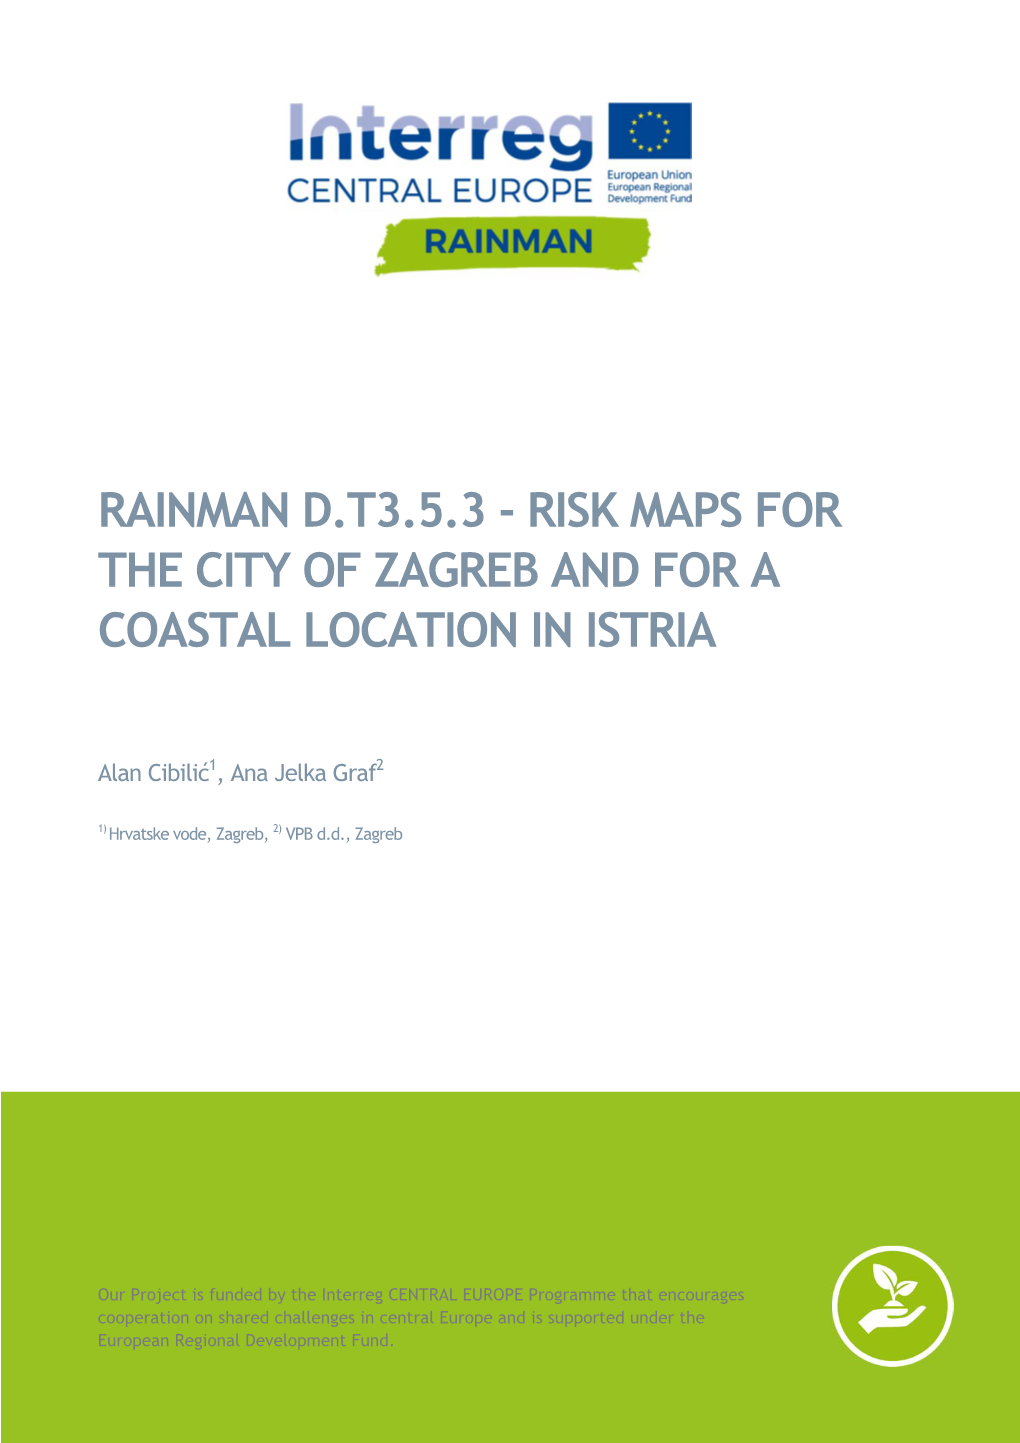 Rainman D.T3.5.3 - Risk Maps for the City of Zagreb and for a Coastal Location in Istria